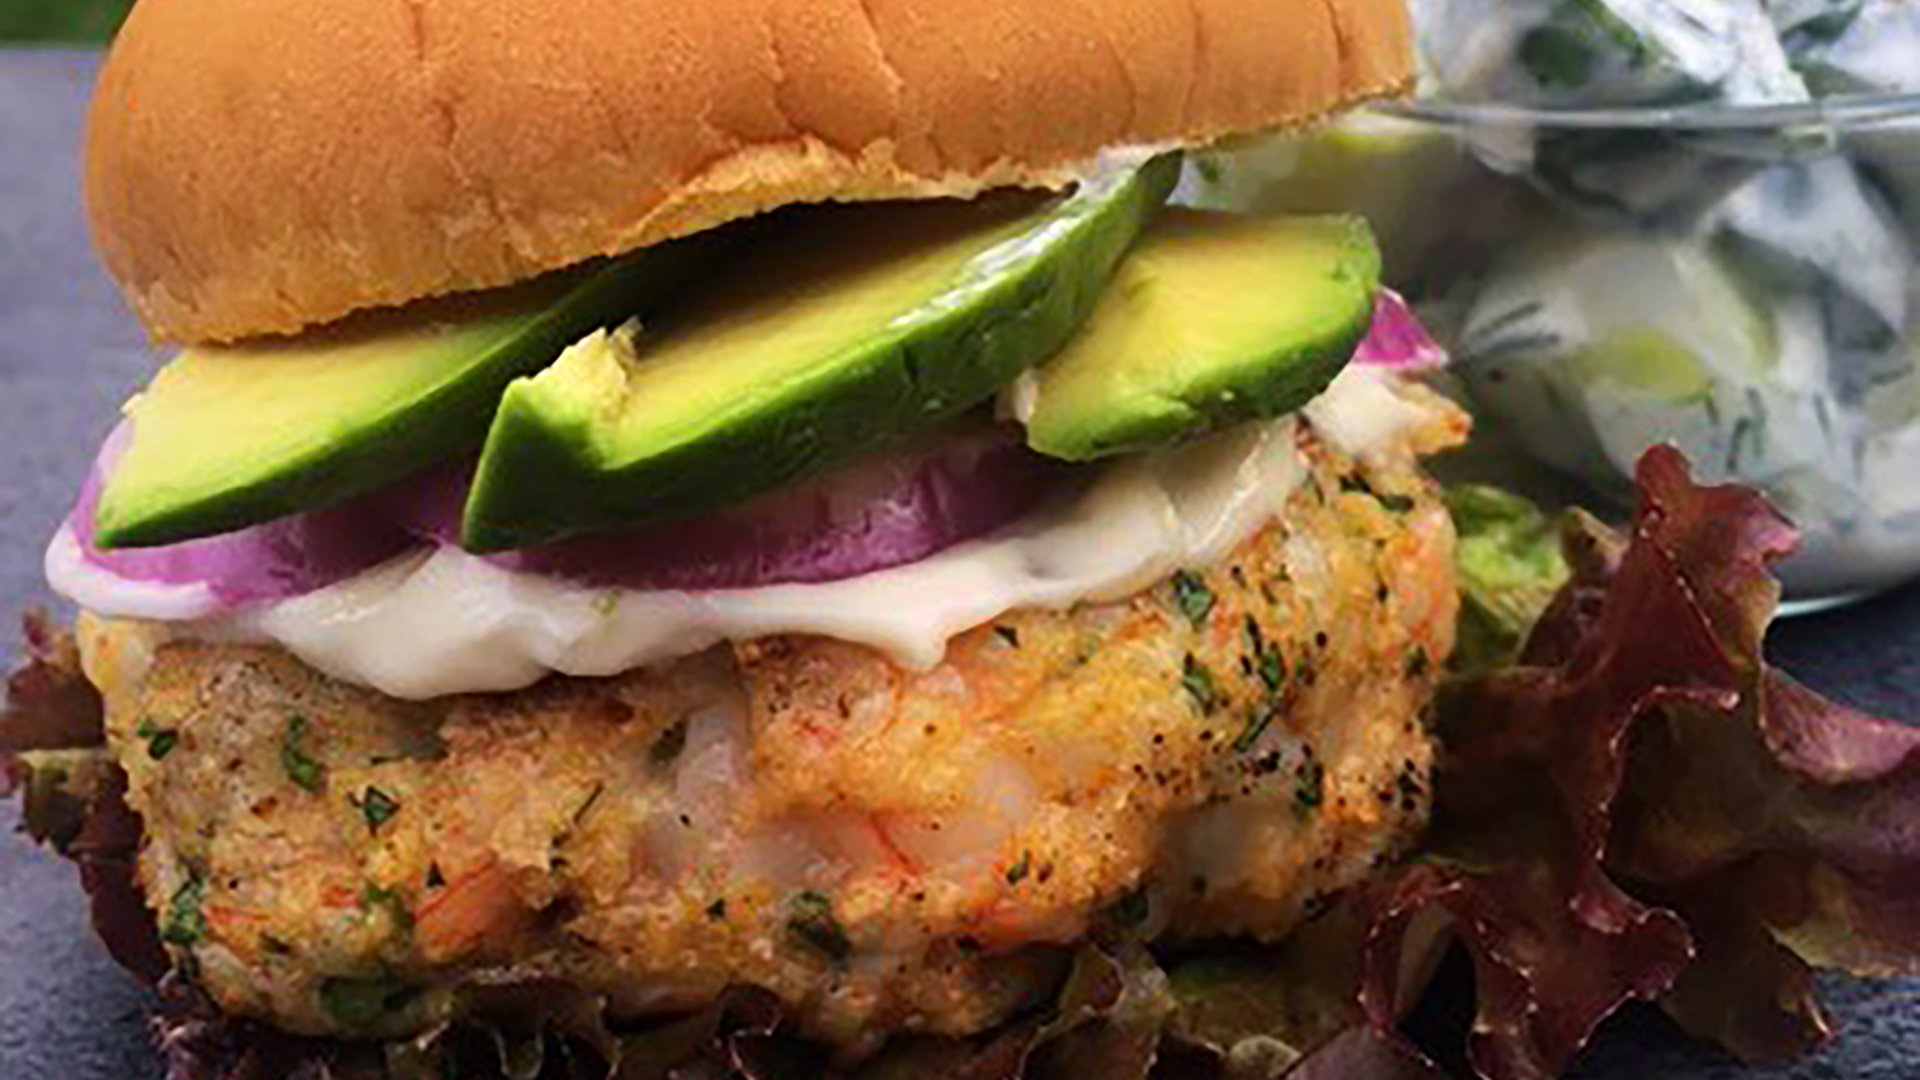 Chili shrimp burgers with grilled onion and avocado mayo